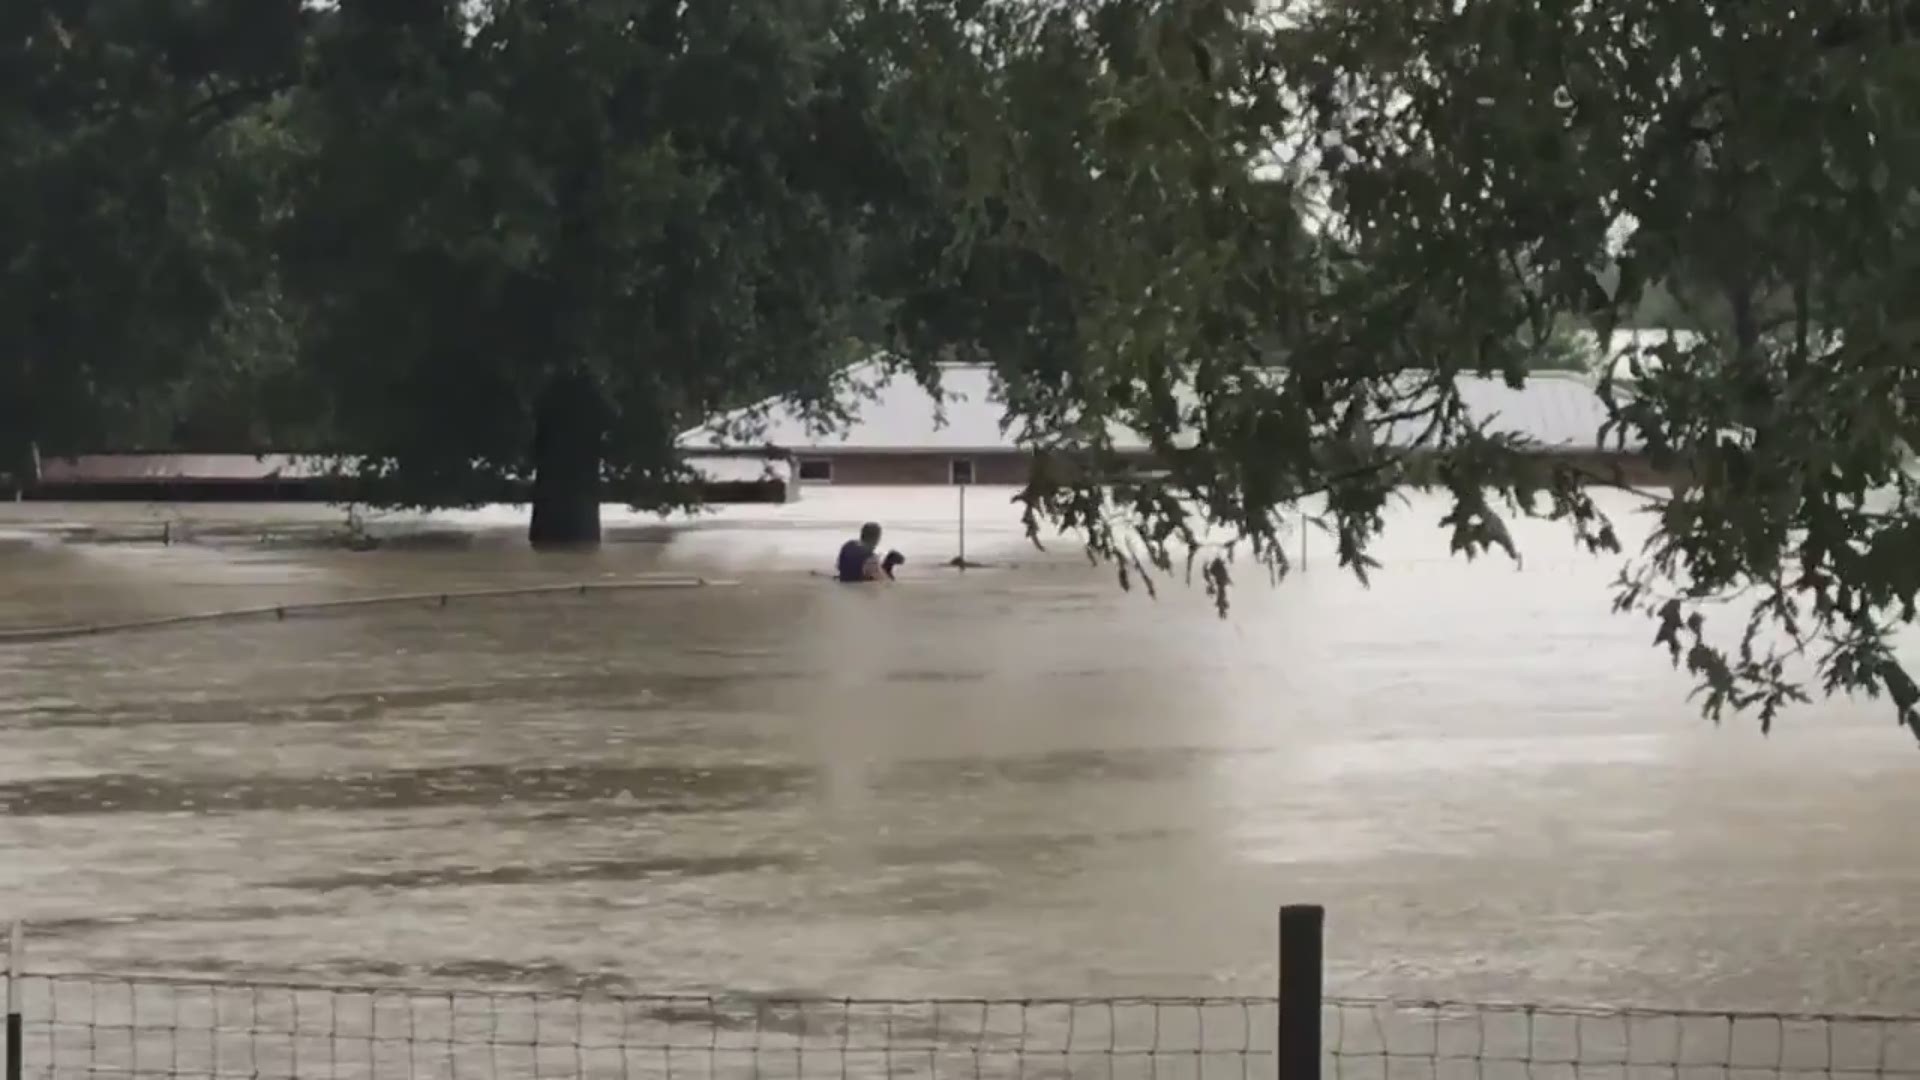 It was a heartbreaking scene near Kingwood as a man struggled through waist-deep water to rescue several animals. Water was halfway up the side of his house.